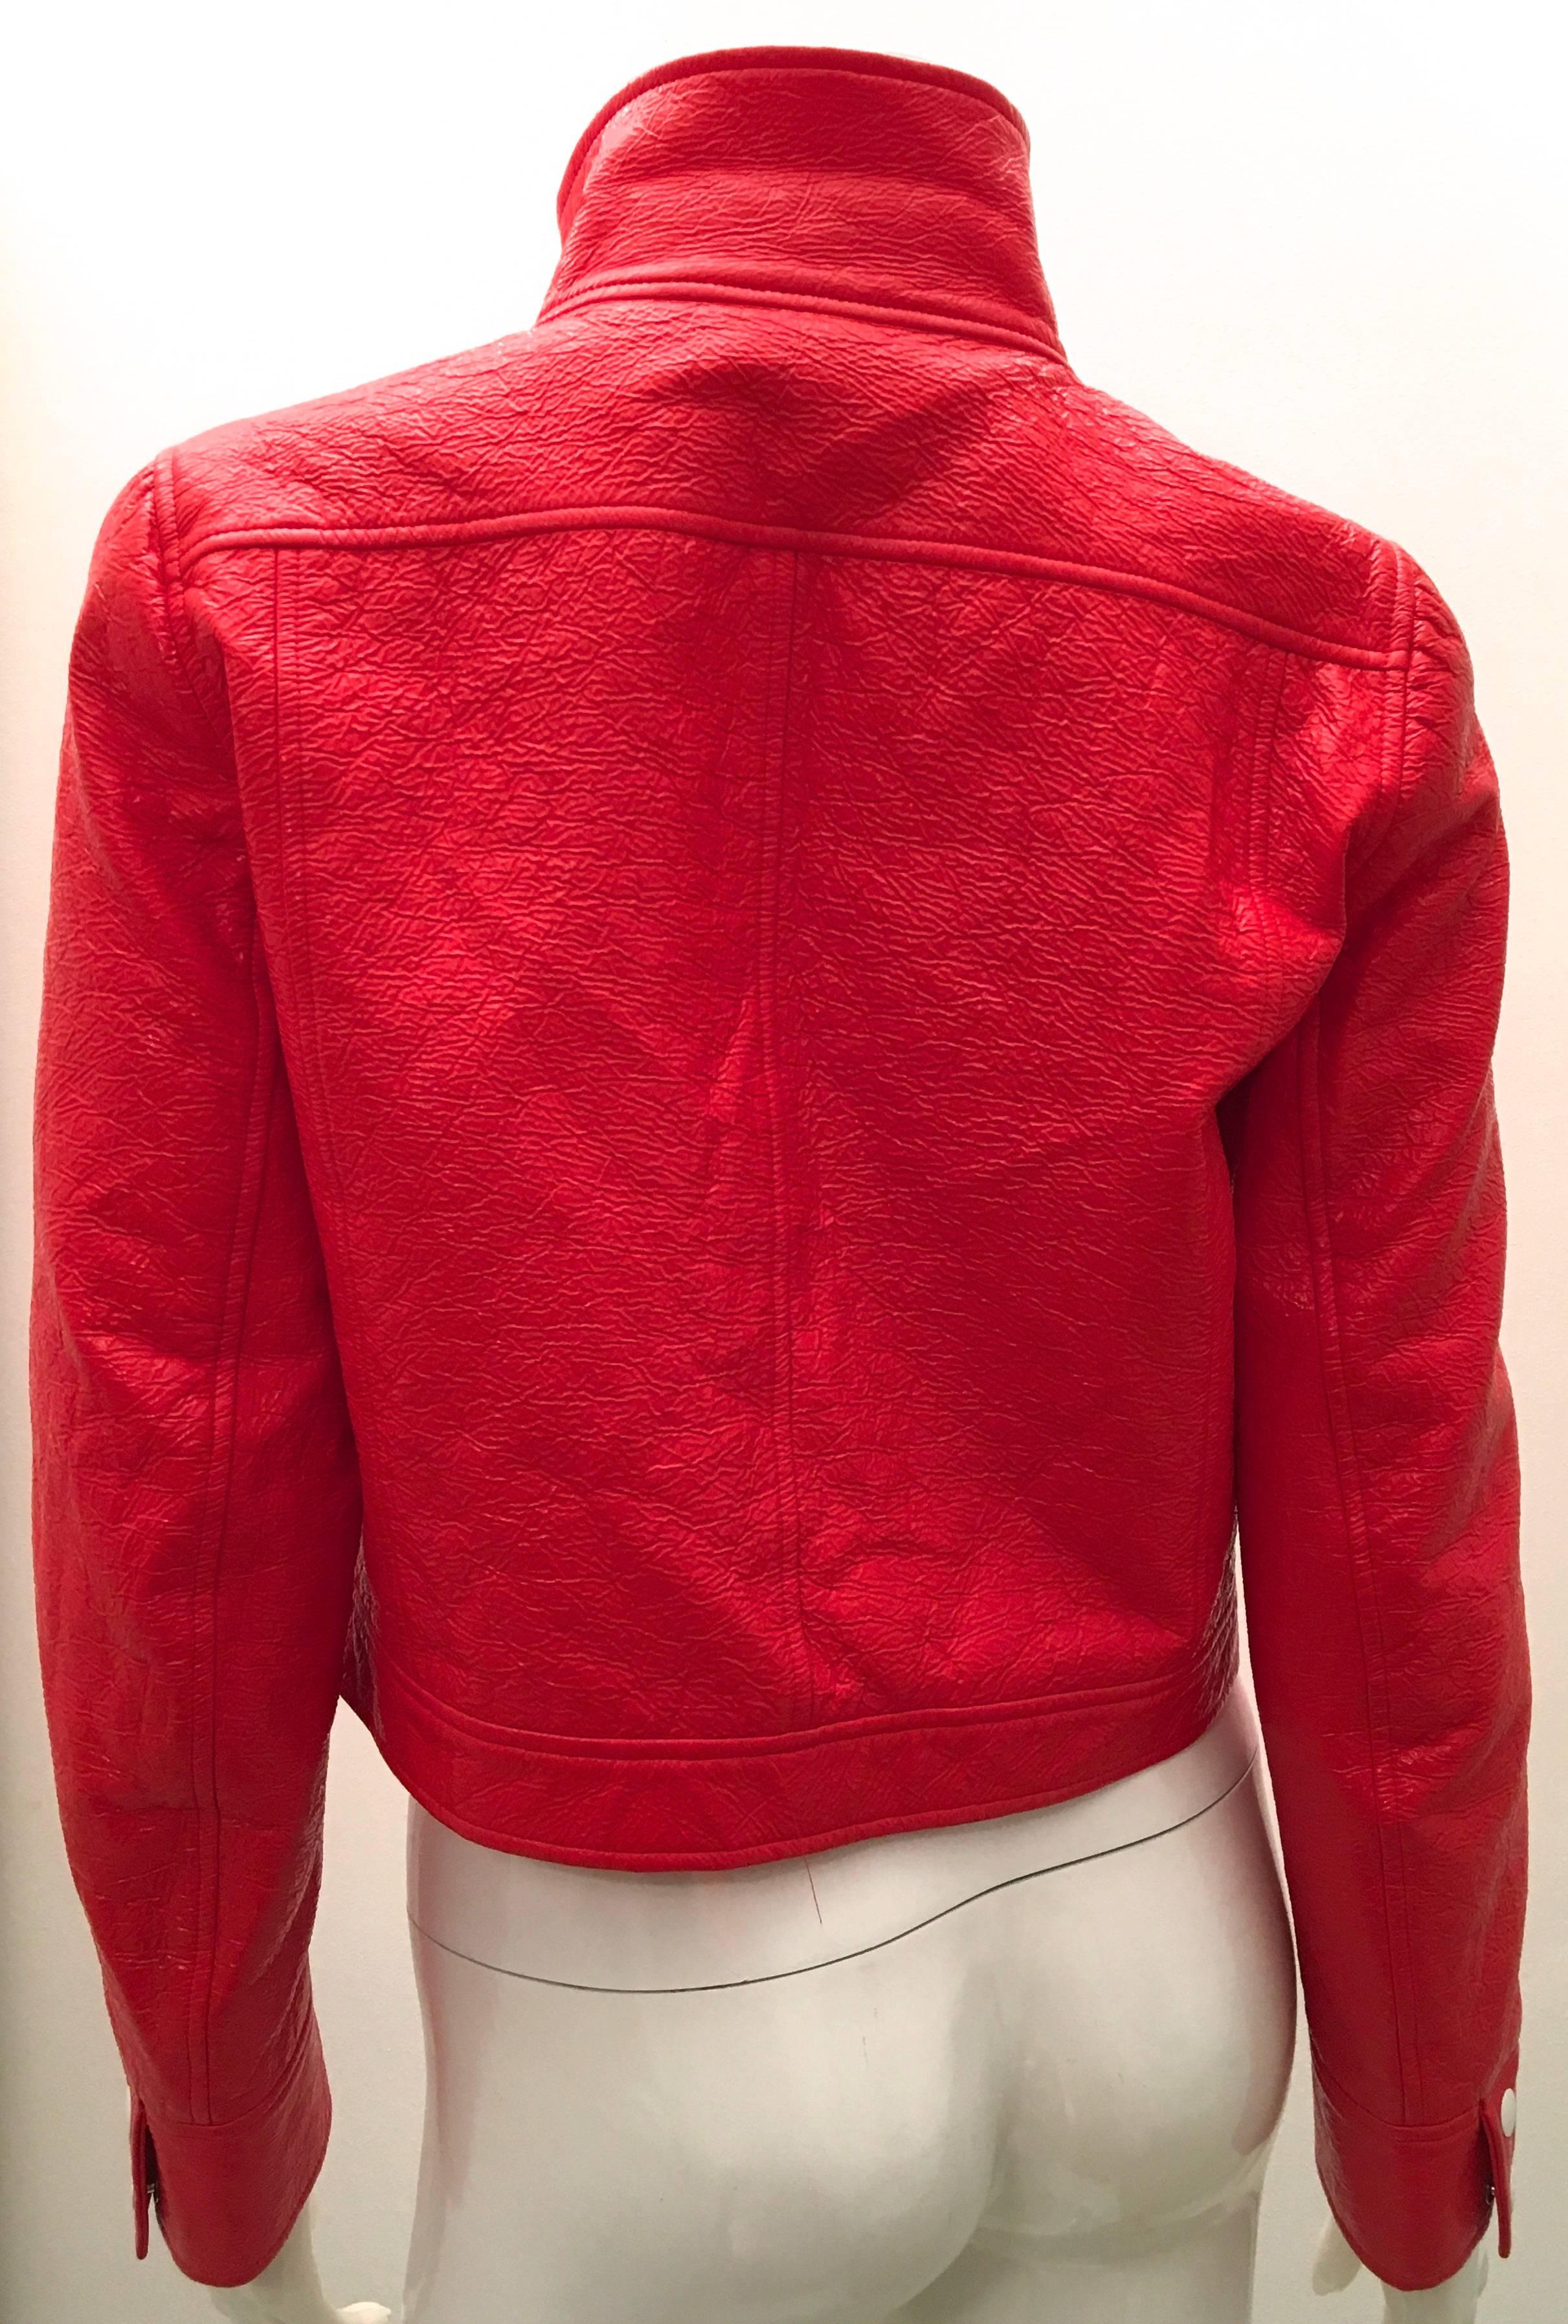 Women's New Courreges Jacket - Orange / Red Patent Leather  For Sale